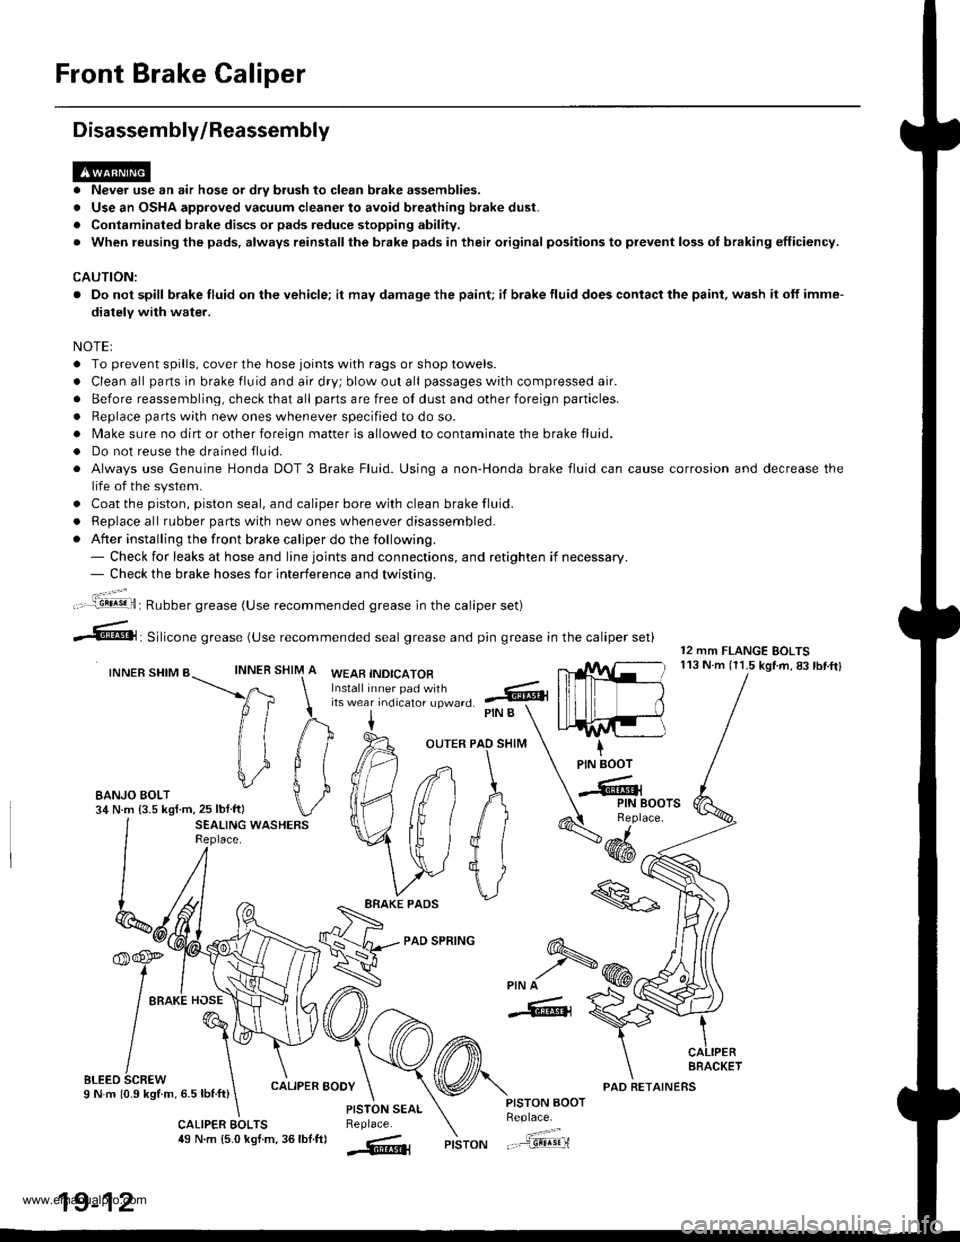 HONDA CR-V 1998 RD1-RD3 / 1.G User Guide 
Front Brake Caliper
Disassembly/Reassembly
. Never use an air hose or dry brush to clean brake assemblies.
. Use an OSHA approved vacuum cleaner to avoid breathing brake dust.
. Contaminated brake di